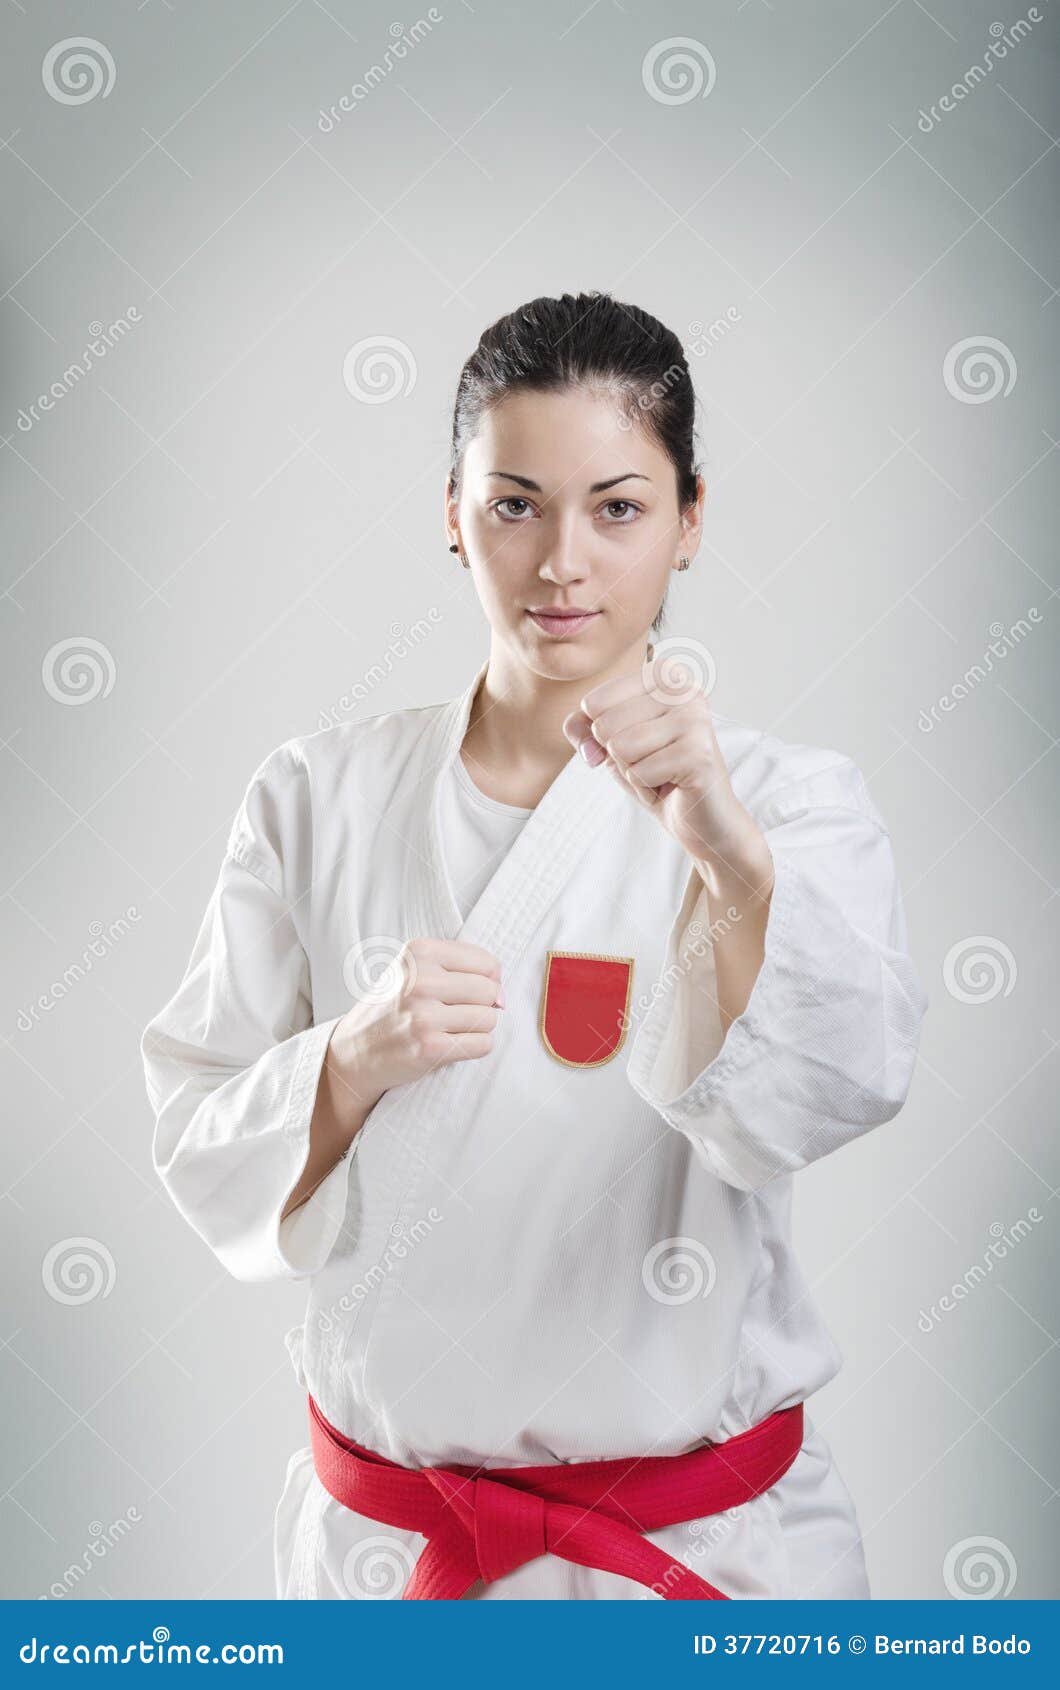 Karate Girl stock photo. Image of confidence, adult, color - 37720716